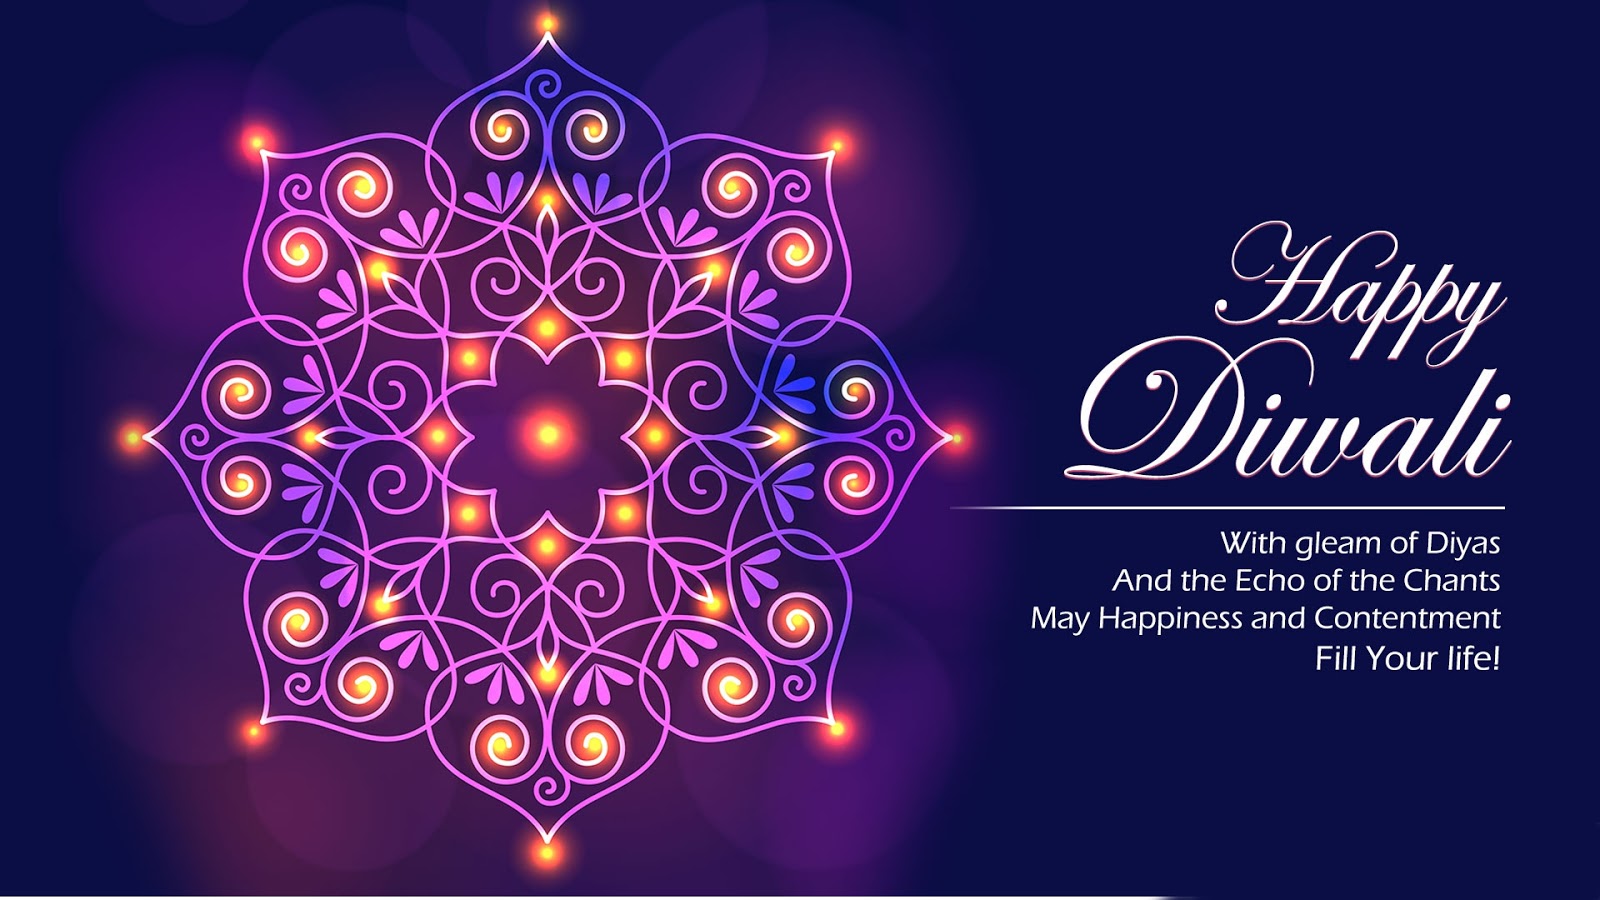 happy diwali with gleam of diyas and the echo of the chants may happiness and contentment fill your life